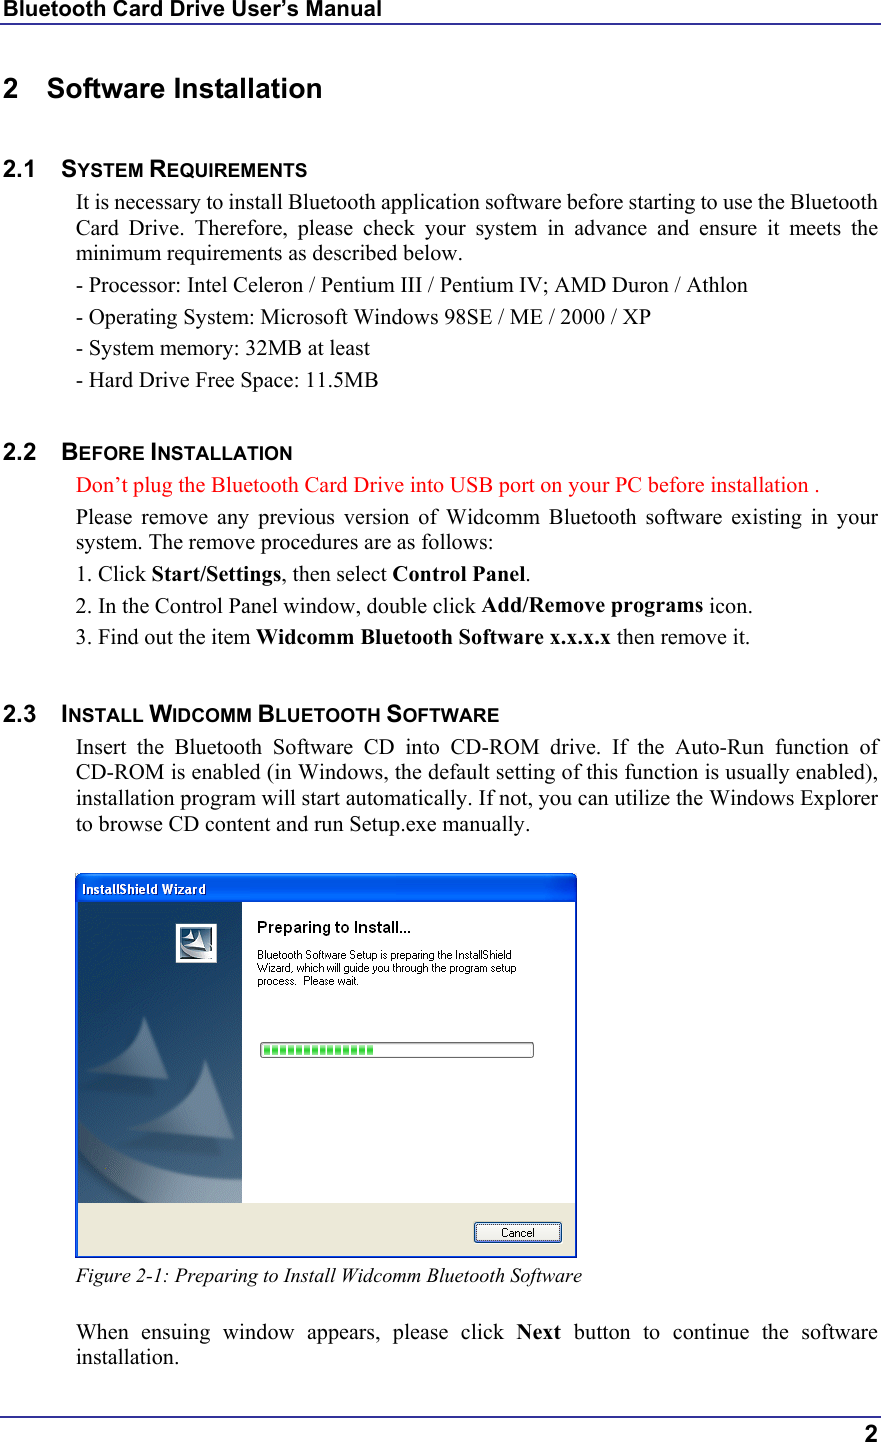 Bluetooth Card Drive User’s Manual  2 2 Software Installation  2.1 SYSTEM REQUIREMENTS It is necessary to install Bluetooth application software before starting to use the Bluetooth Card Drive. Therefore, please check your system in advance and ensure it meets the minimum requirements as described below. - Processor: Intel Celeron / Pentium III / Pentium IV; AMD Duron / Athlon - Operating System: Microsoft Windows 98SE / ME / 2000 / XP - System memory: 32MB at least - Hard Drive Free Space: 11.5MB  2.2 BEFORE INSTALLATION  Don’t plug the Bluetooth Card Drive into USB port on your PC before installation . Please remove any previous version of Widcomm Bluetooth software existing in your system. The remove procedures are as follows: 1. Click Start/Settings, then select Control Panel. 2. In the Control Panel window, double click Add/Remove programs icon. 3. Find out the item Widcomm Bluetooth Software x.x.x.x then remove it.  2.3 INSTALL WIDCOMM BLUETOOTH SOFTWARE Insert the Bluetooth Software CD into CD-ROM drive. If the Auto-Run function of CD-ROM is enabled (in Windows, the default setting of this function is usually enabled), installation program will start automatically. If not, you can utilize the Windows Explorer to browse CD content and run Setup.exe manually.   Figure 2-1: Preparing to Install Widcomm Bluetooth Software  When ensuing window appears, please click Next  button to continue the software installation. 